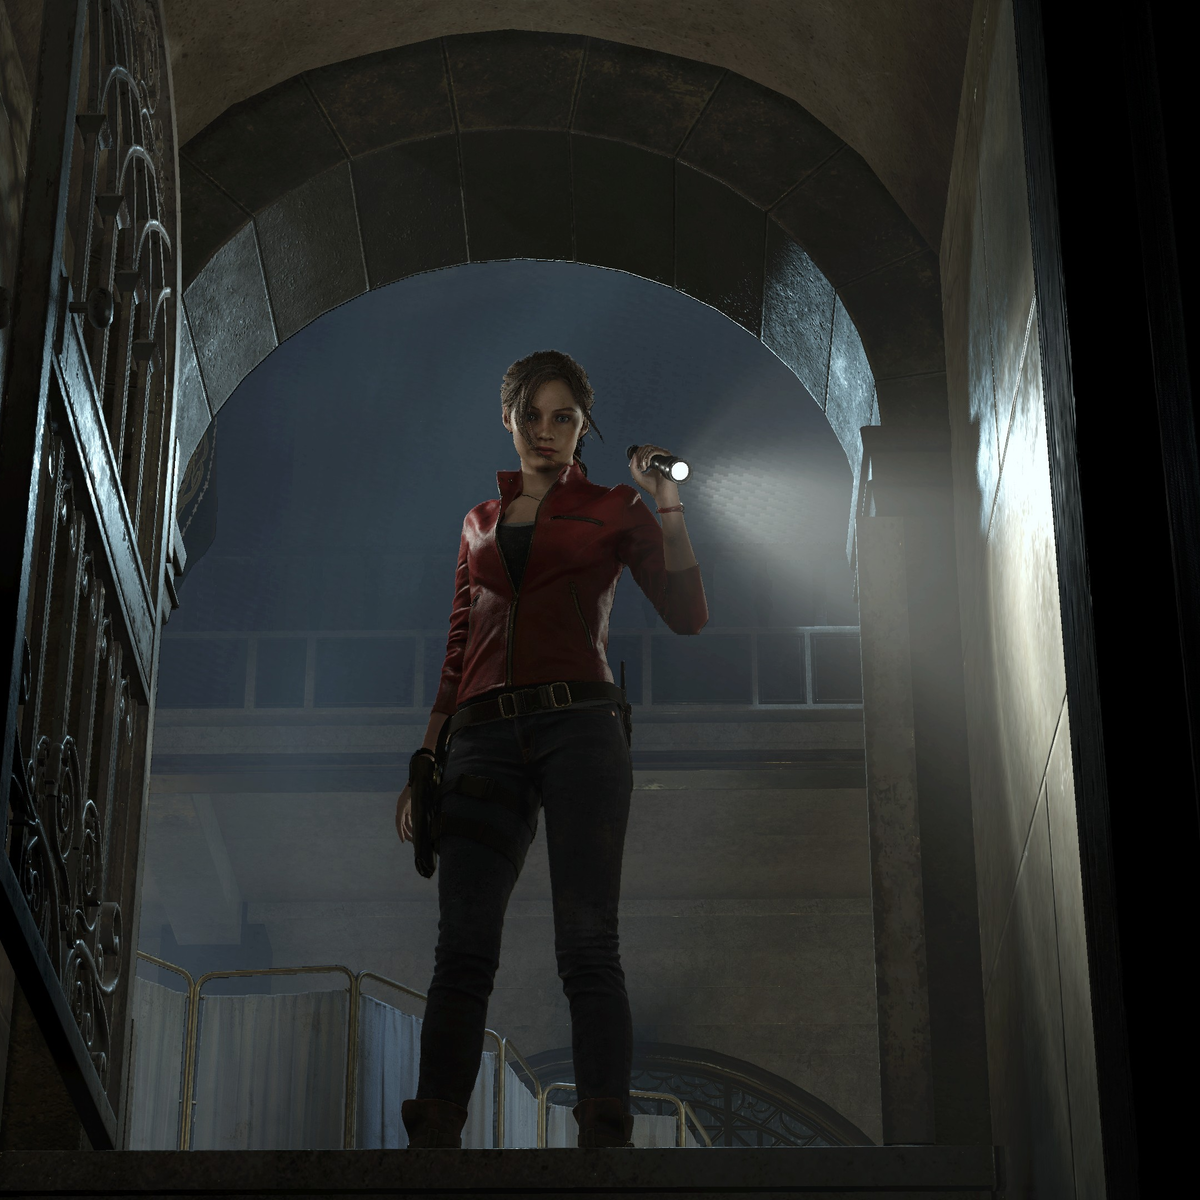 Resident Evil 3 looks to be next Nintendo Switch game using cloud